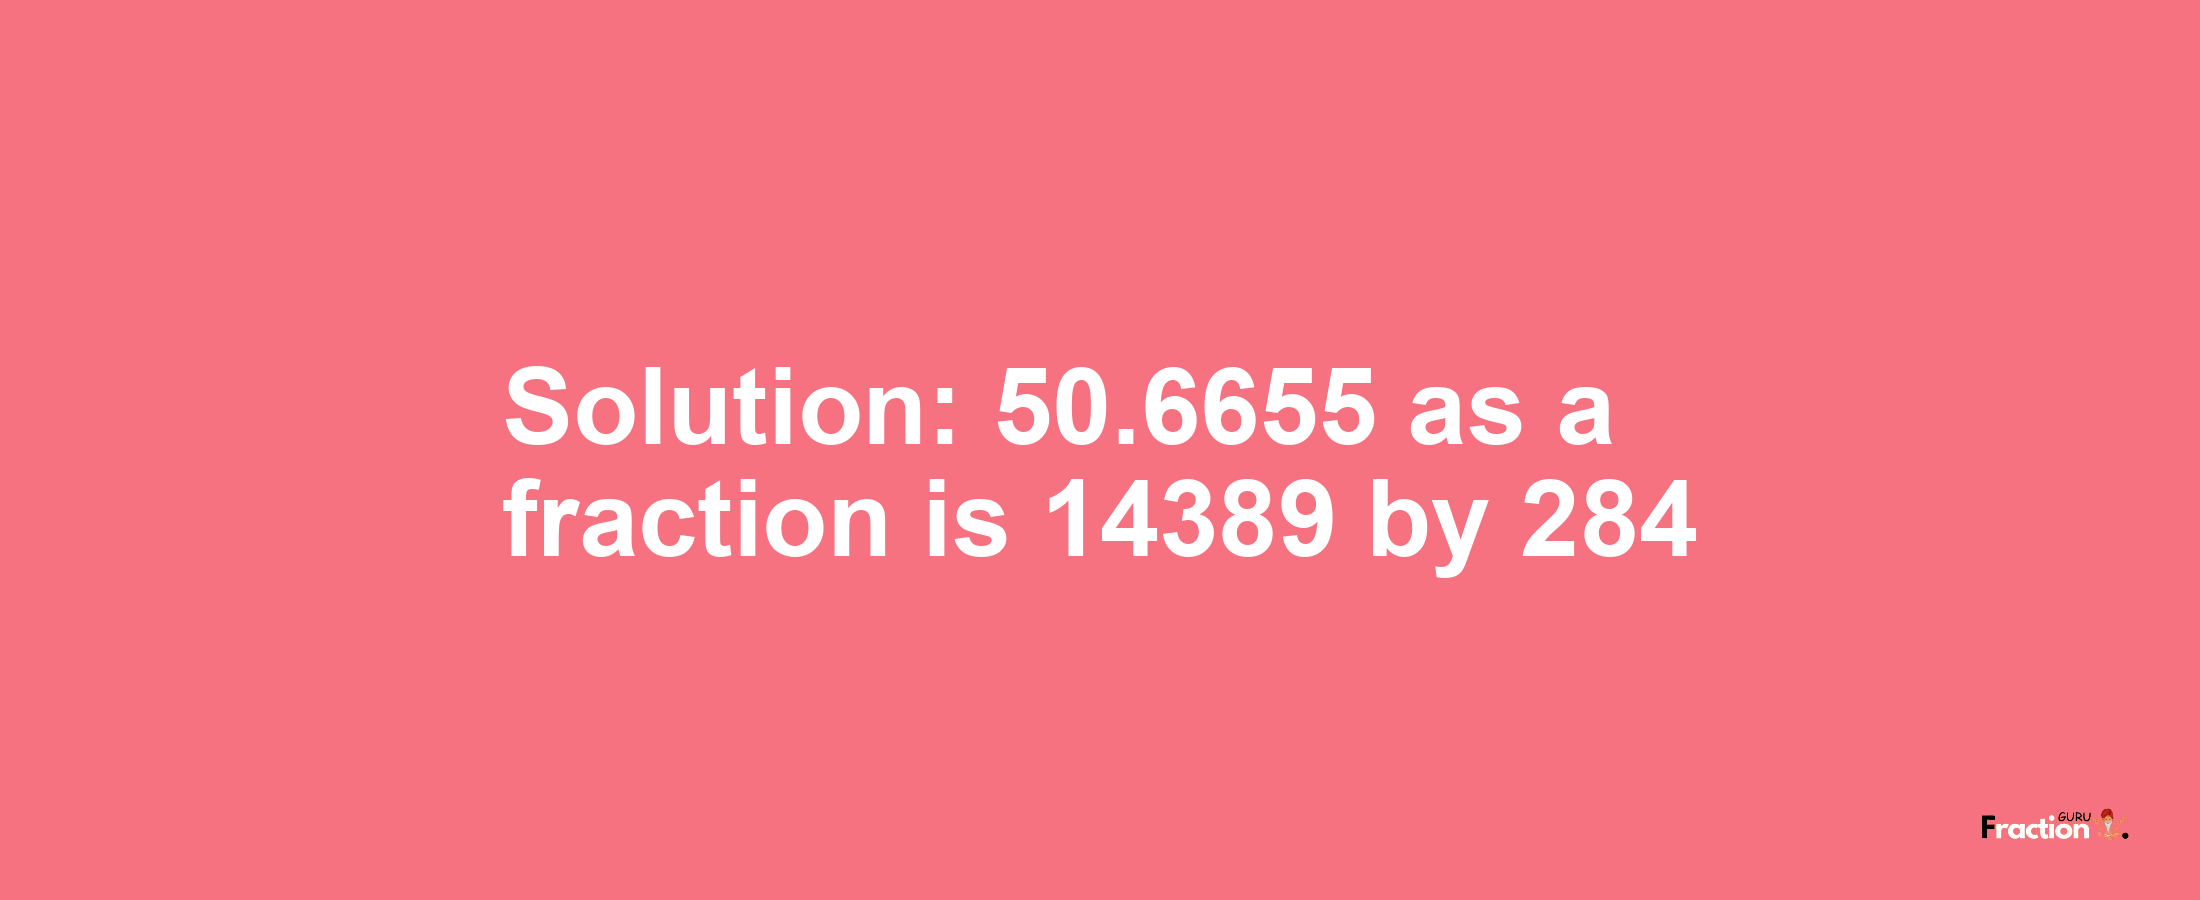 Solution:50.6655 as a fraction is 14389/284